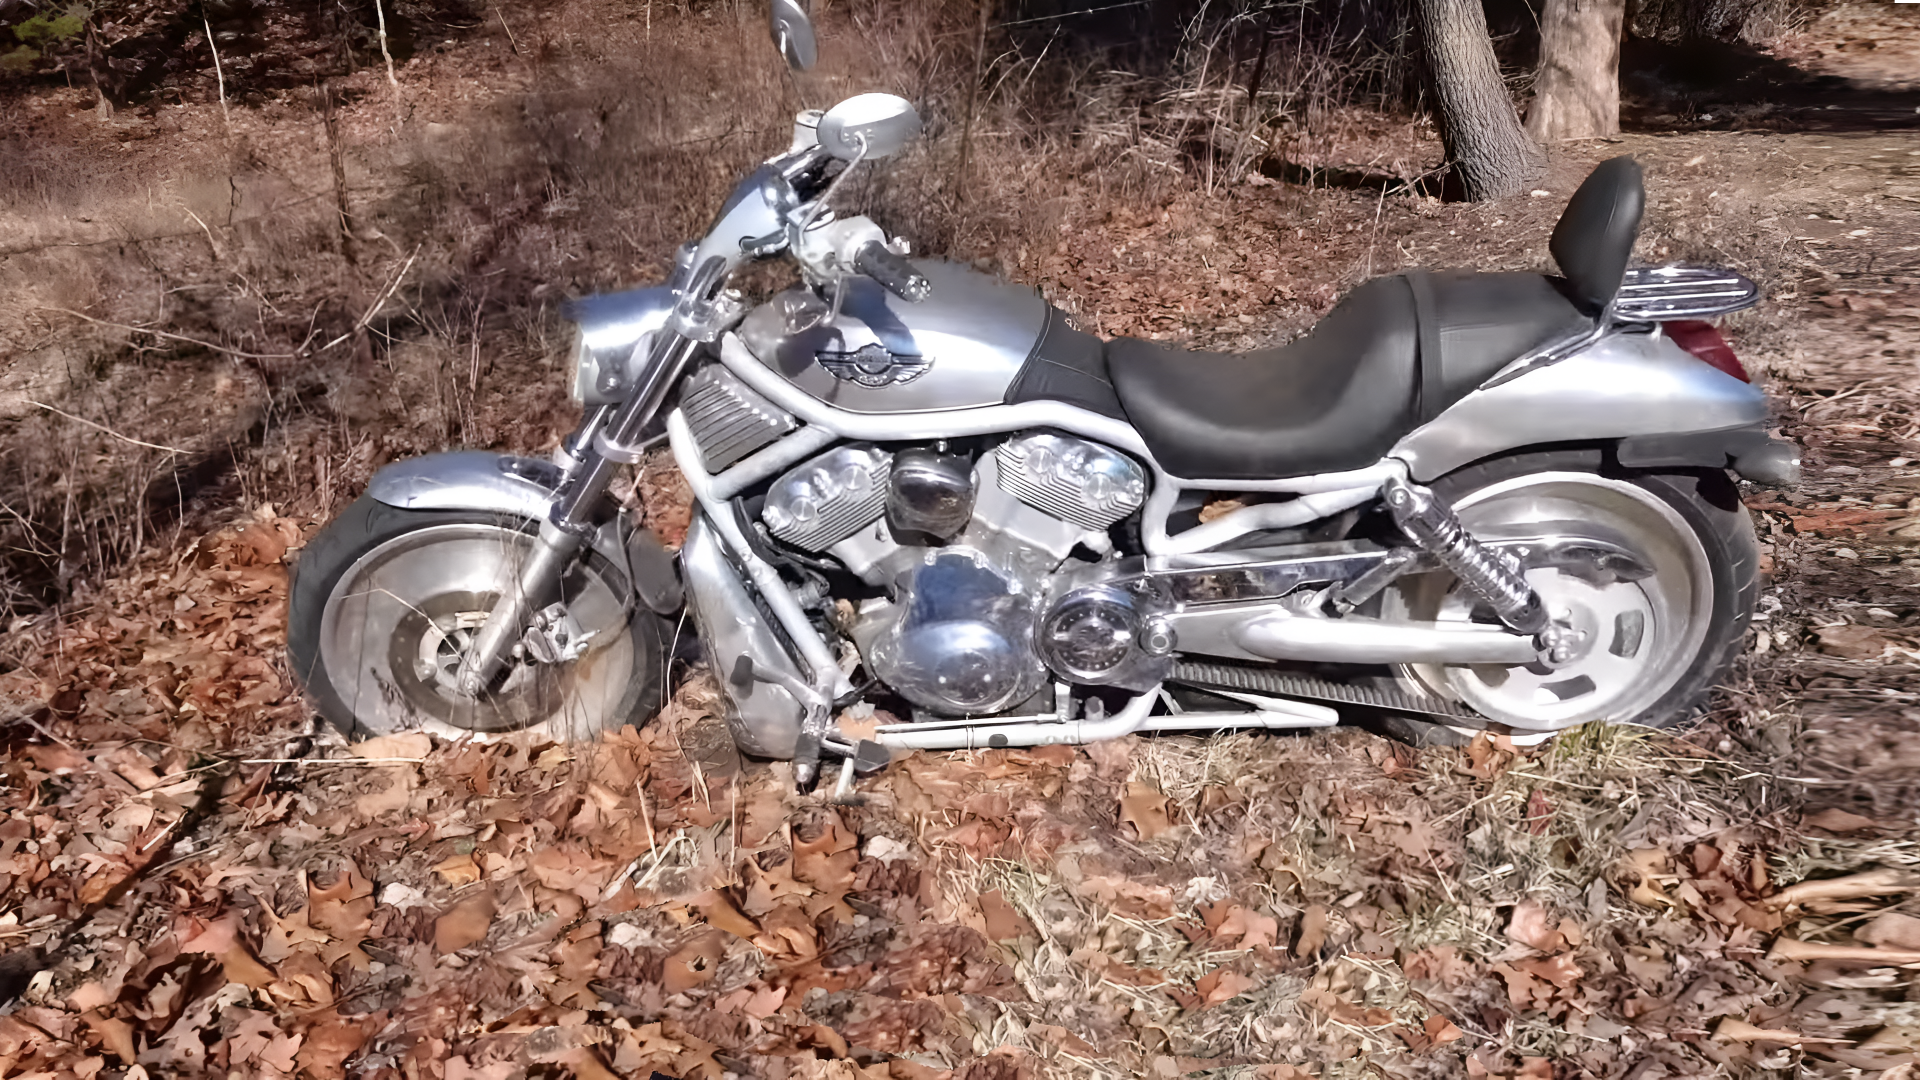 This Harley-Davidson V-Rod Was Found In The Woods